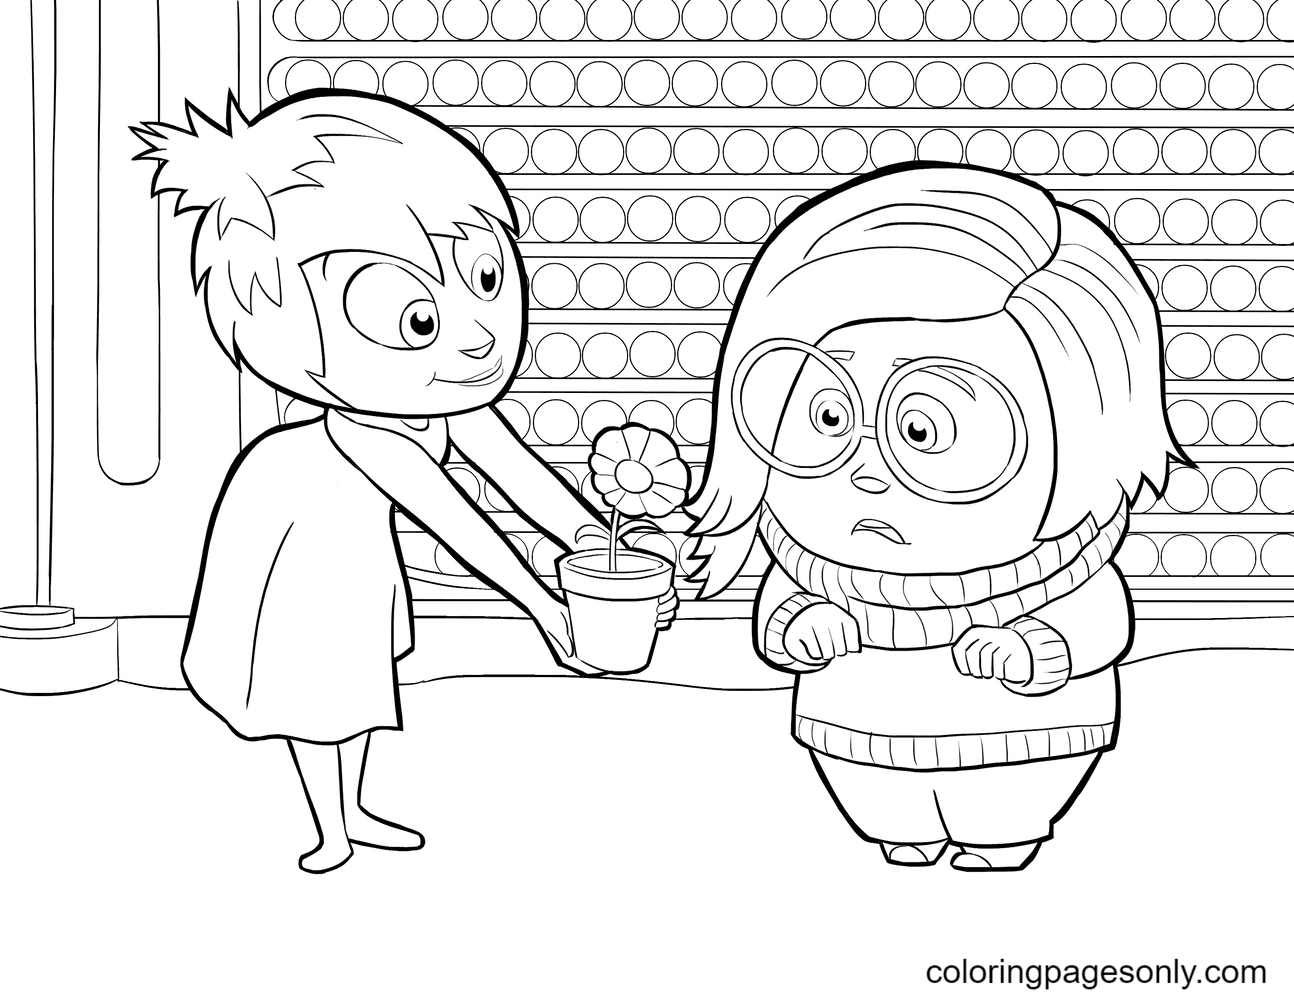 Joy gives flowers for Sadness Coloring Pages